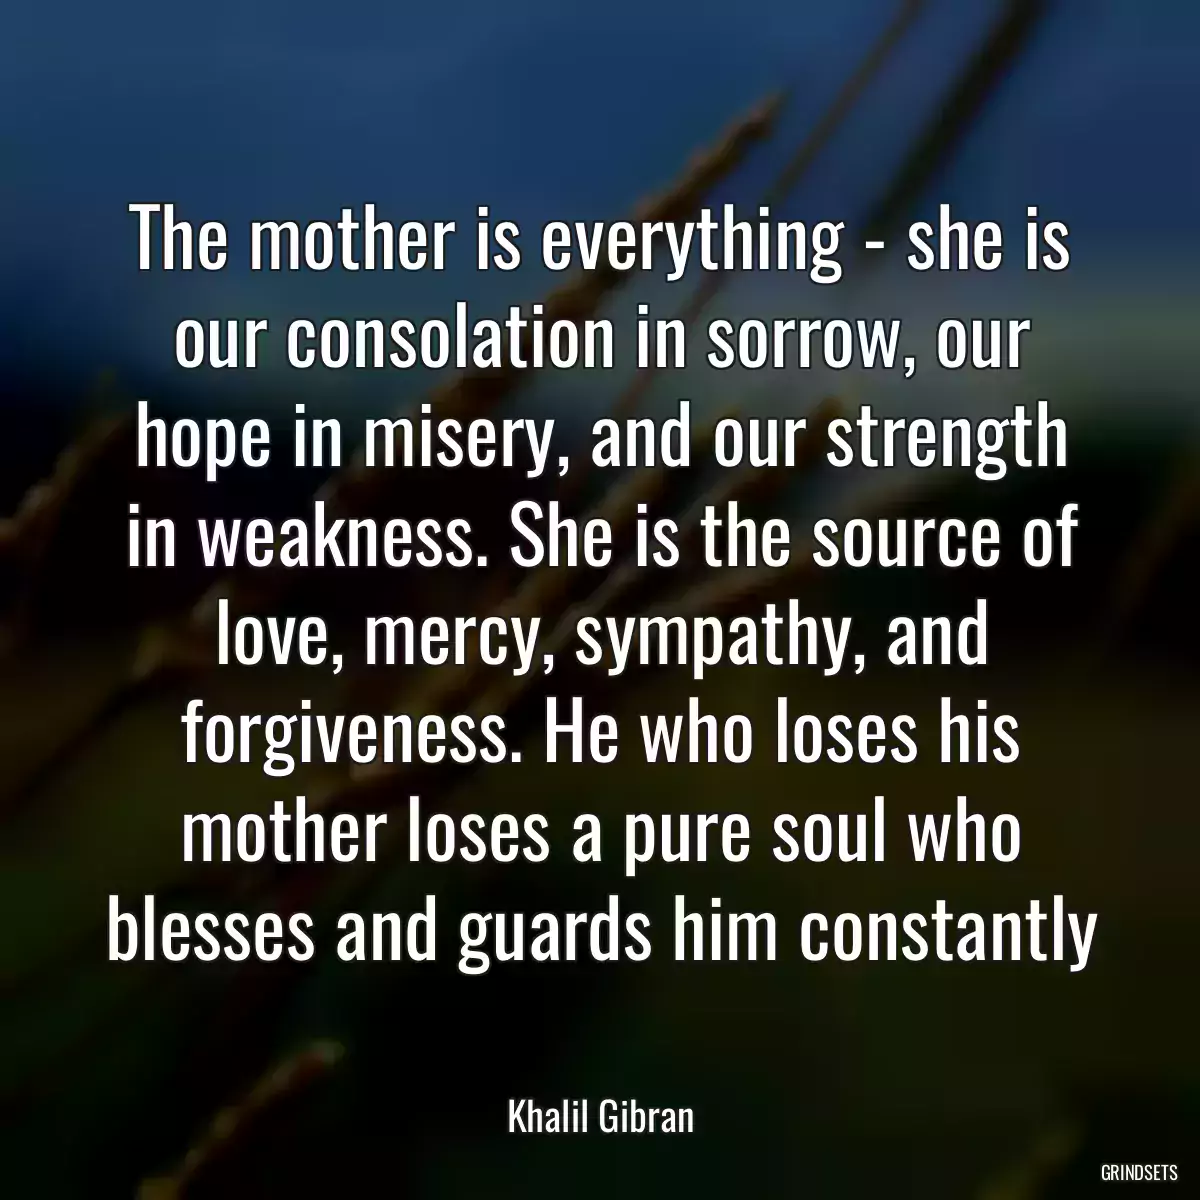 The mother is everything - she is our consolation in sorrow, our hope in misery, and our strength in weakness. She is the source of love, mercy, sympathy, and forgiveness. He who loses his mother loses a pure soul who blesses and guards him constantly